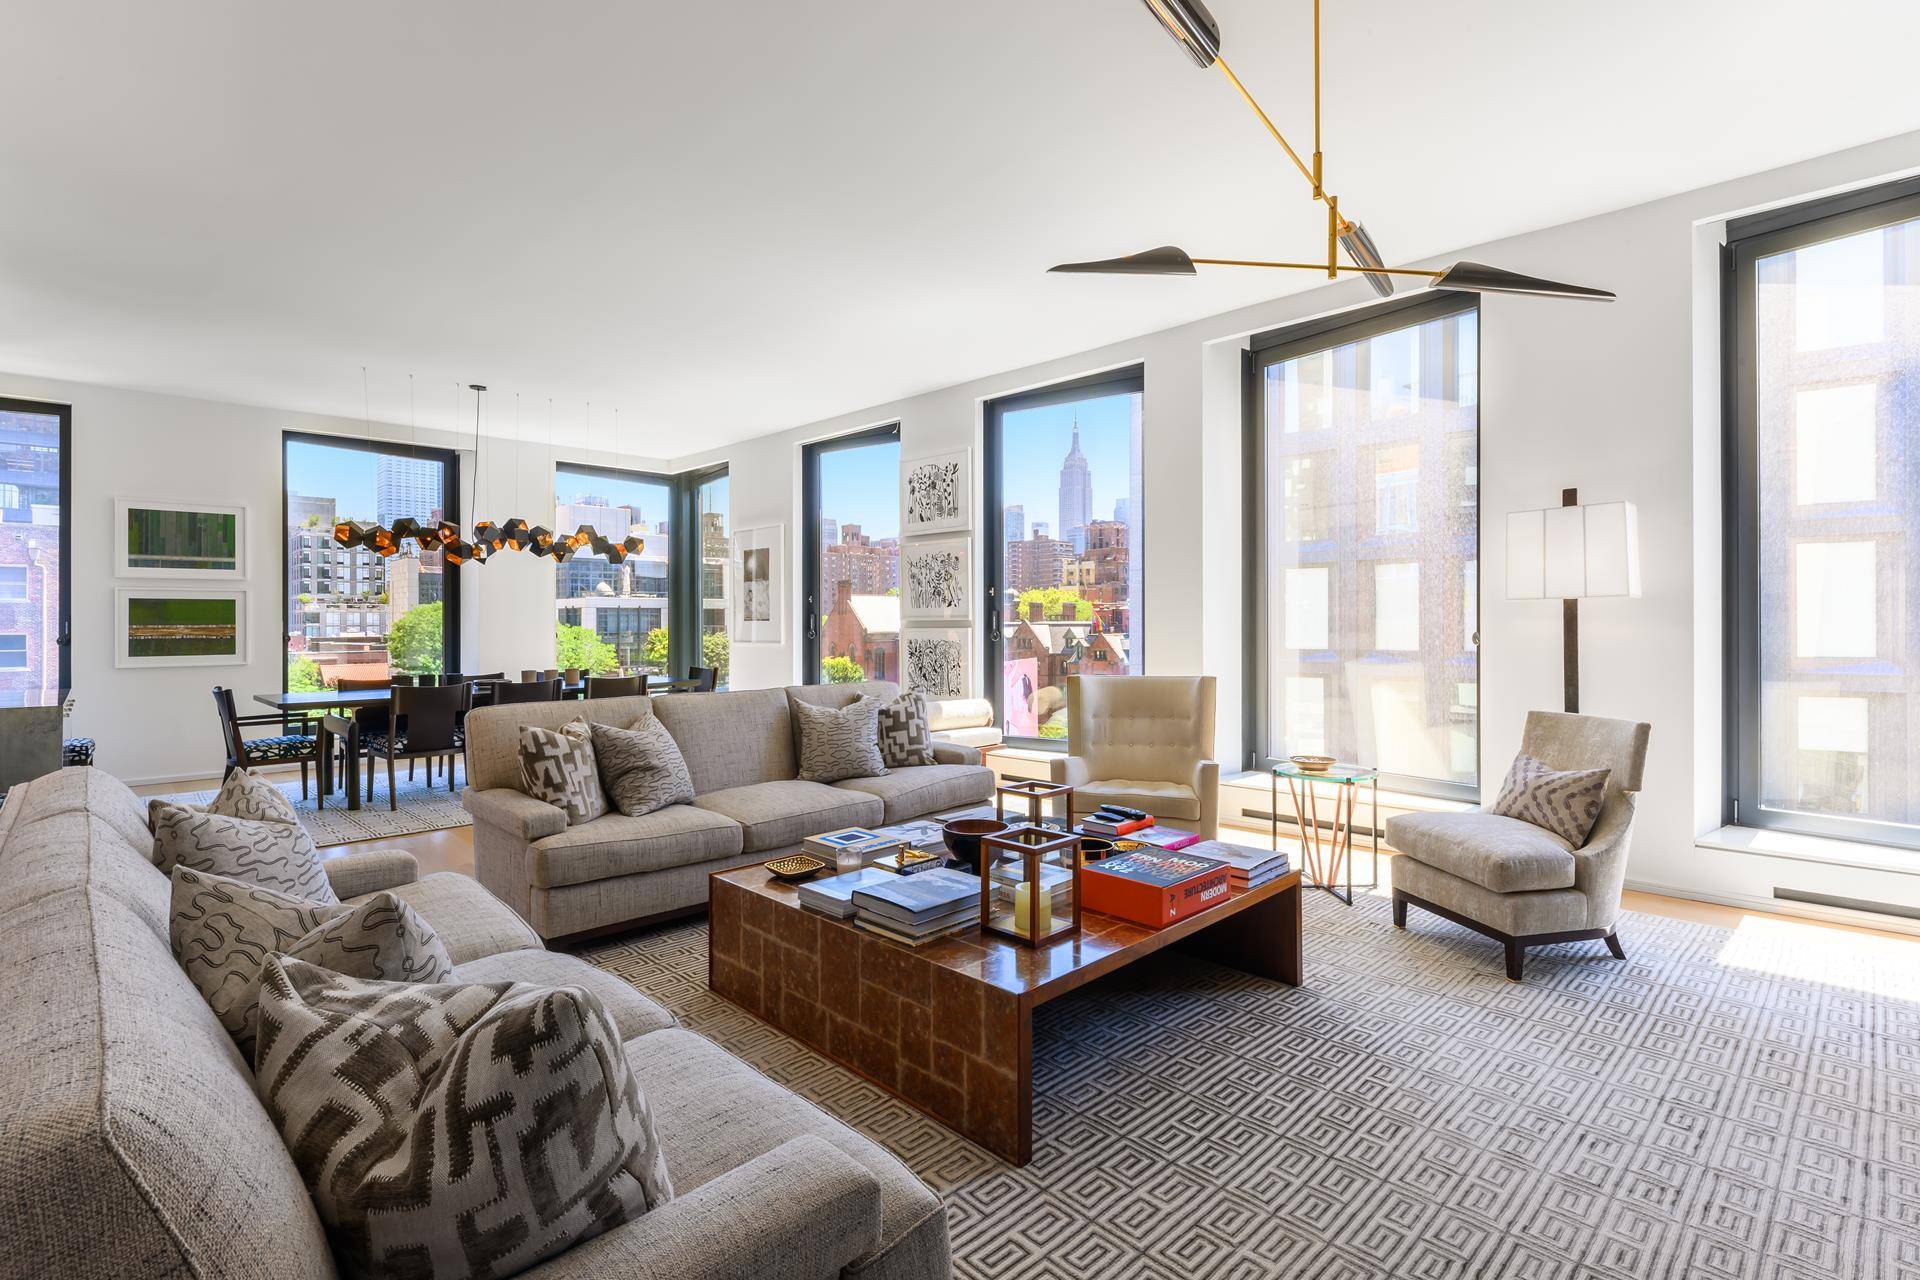 THE APARTMENTExceptional 3, 000 SqFt full floor residence at 505 West 19th Street with three bedrooms, three and a half bathrooms, and 360 degree panoramic views.